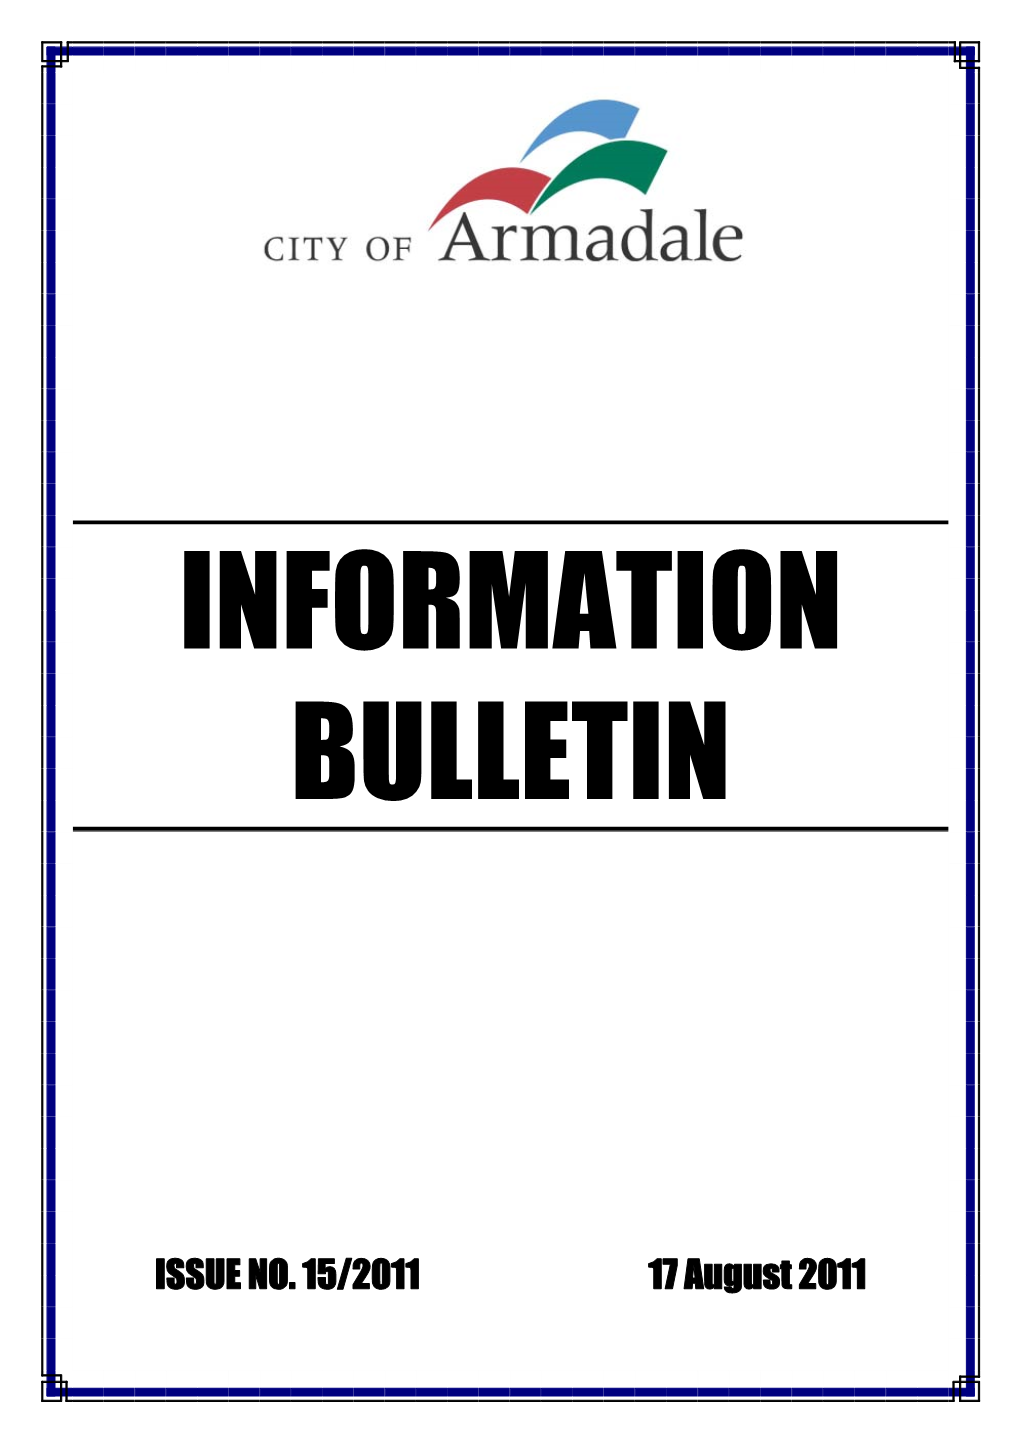 Issue No. 15/2011 Bulletin